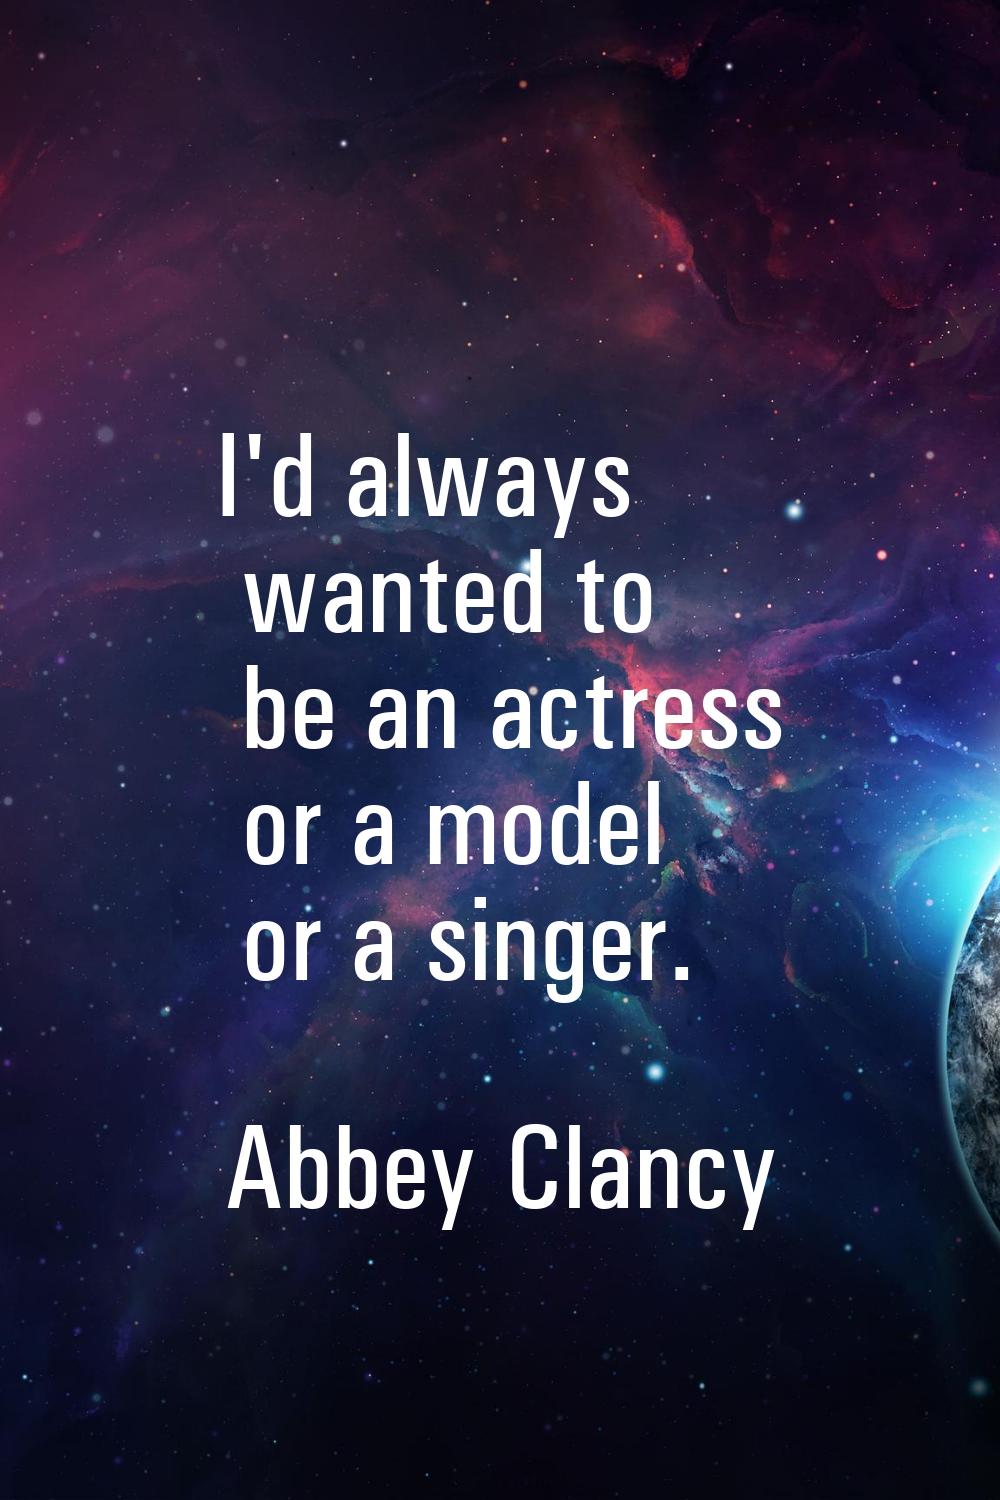 I'd always wanted to be an actress or a model or a singer.